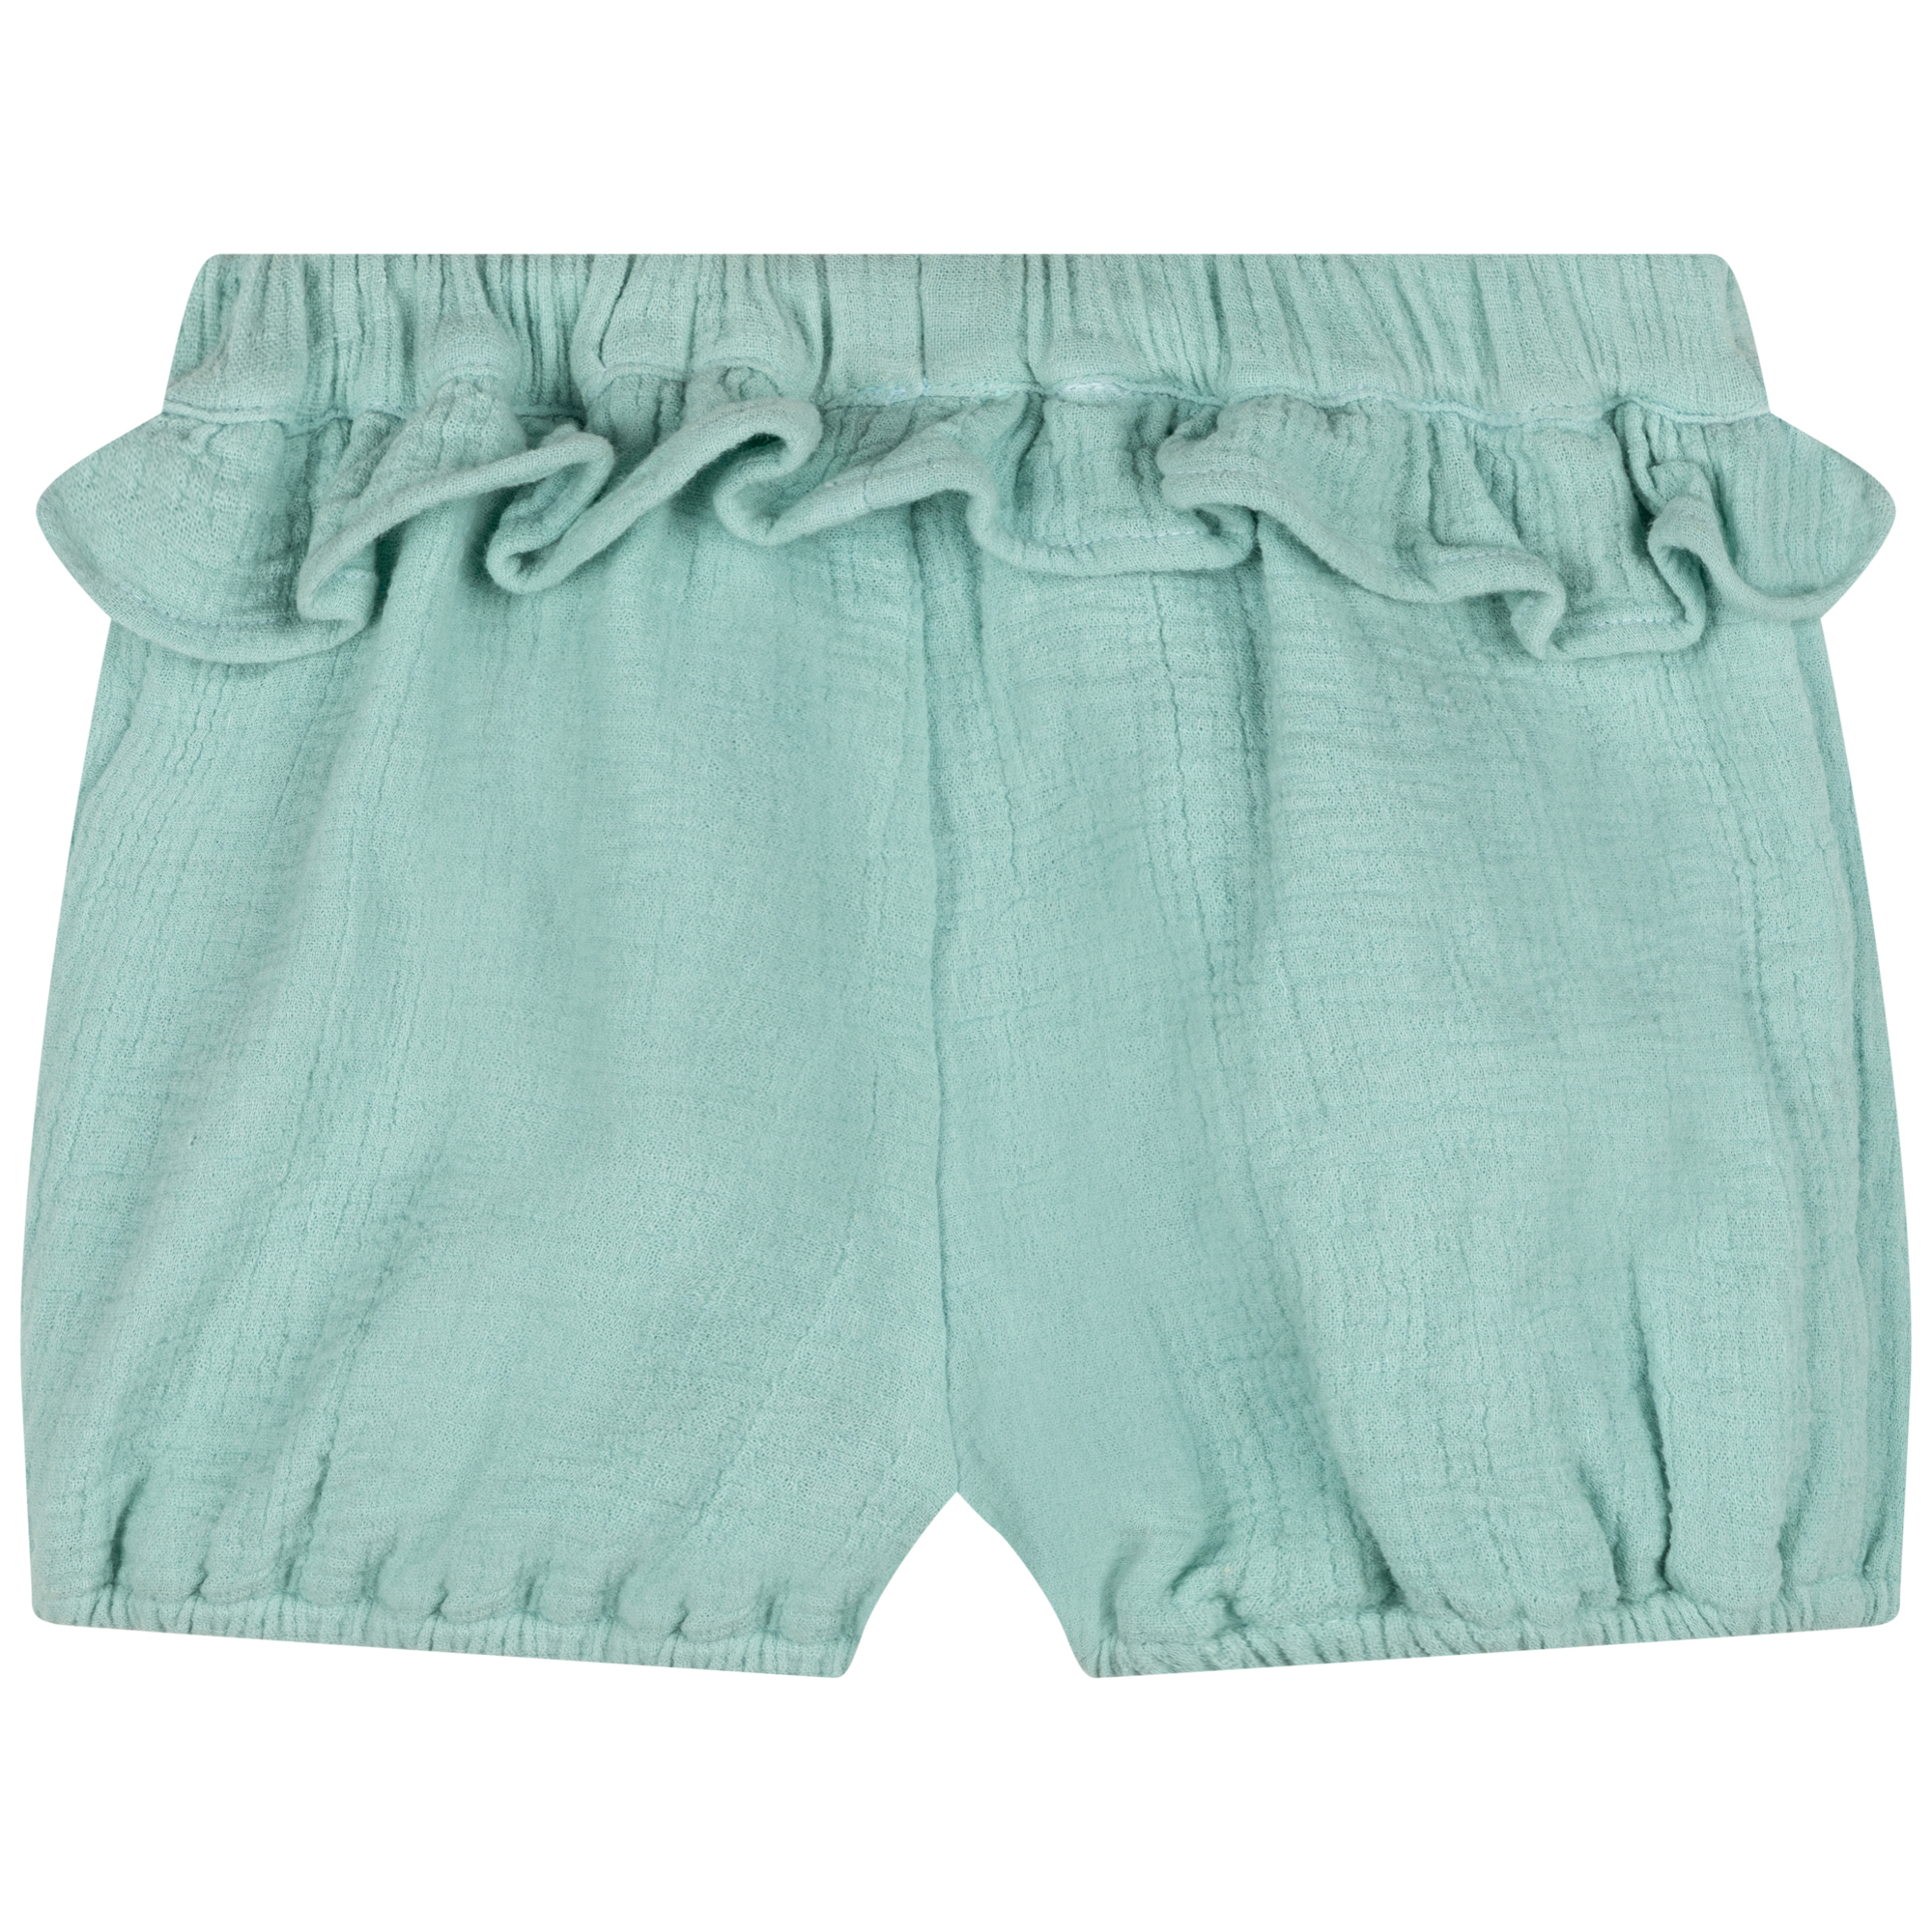 Waffled cotton shorts CARREMENT BEAU for GIRL